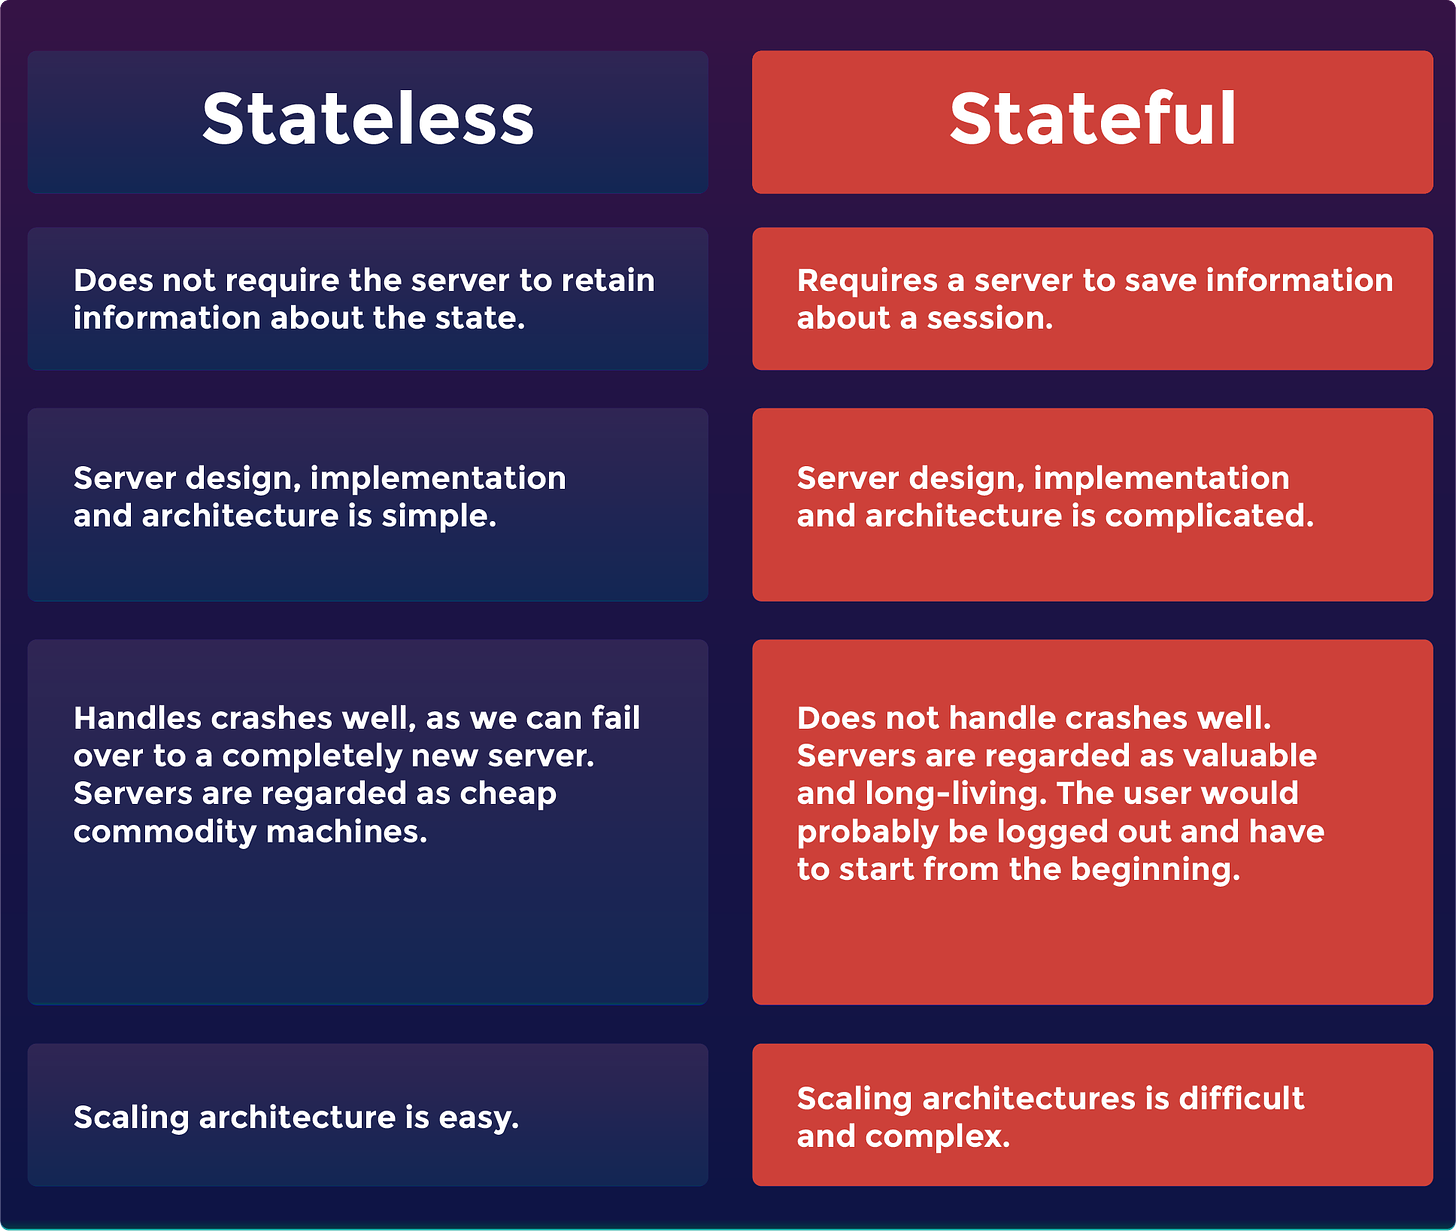 Table comparing stateful and stateless architecture